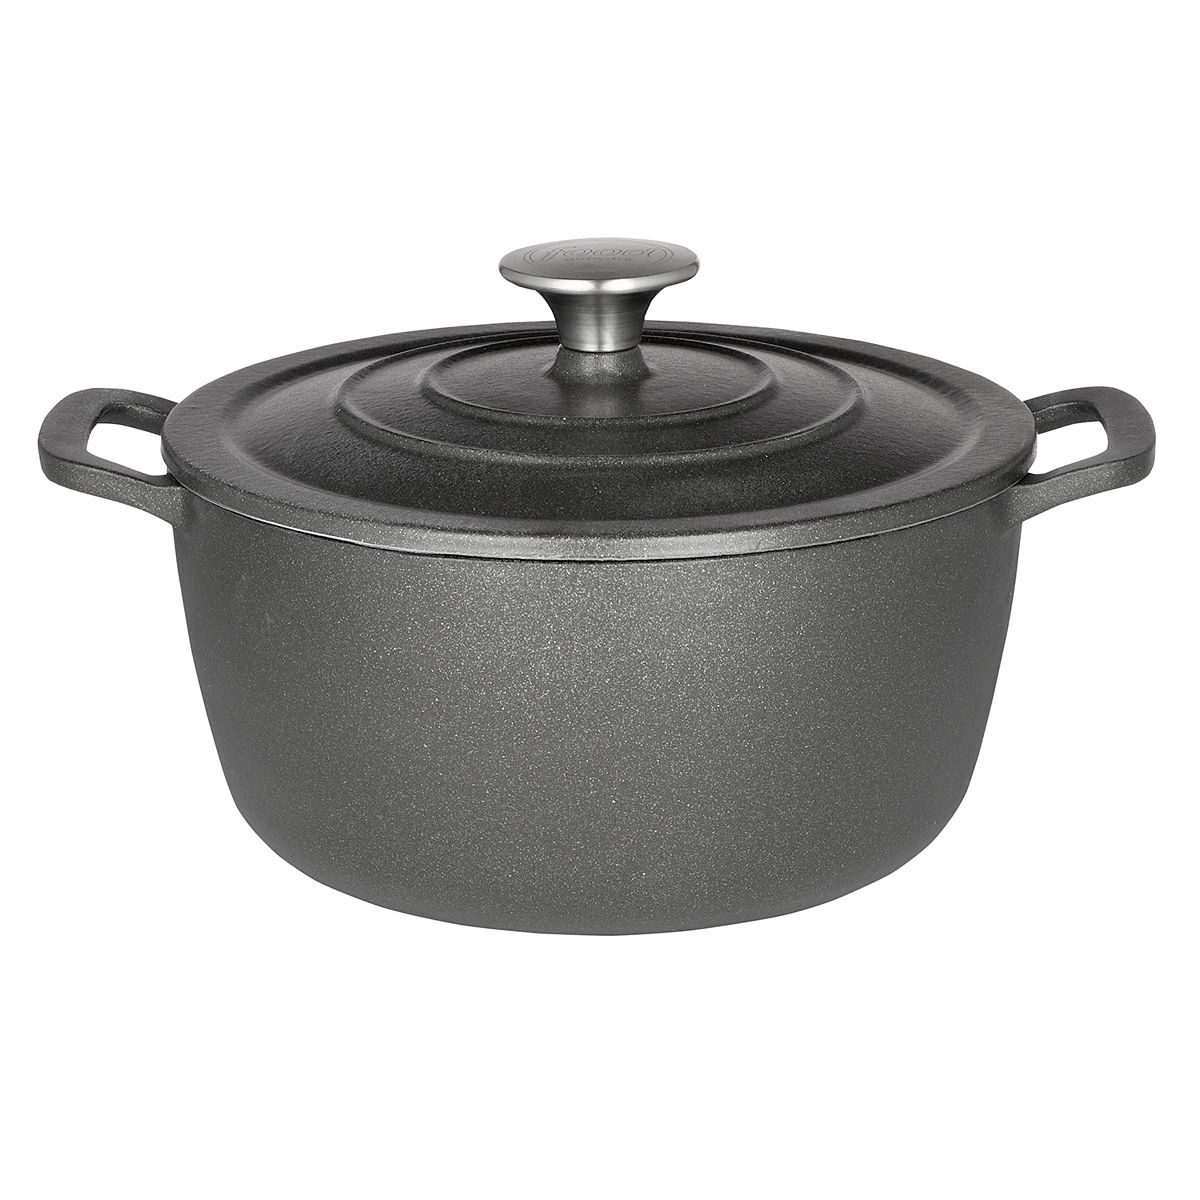 Food Network Dutch Oven on Sale! Best Price RIght Now!